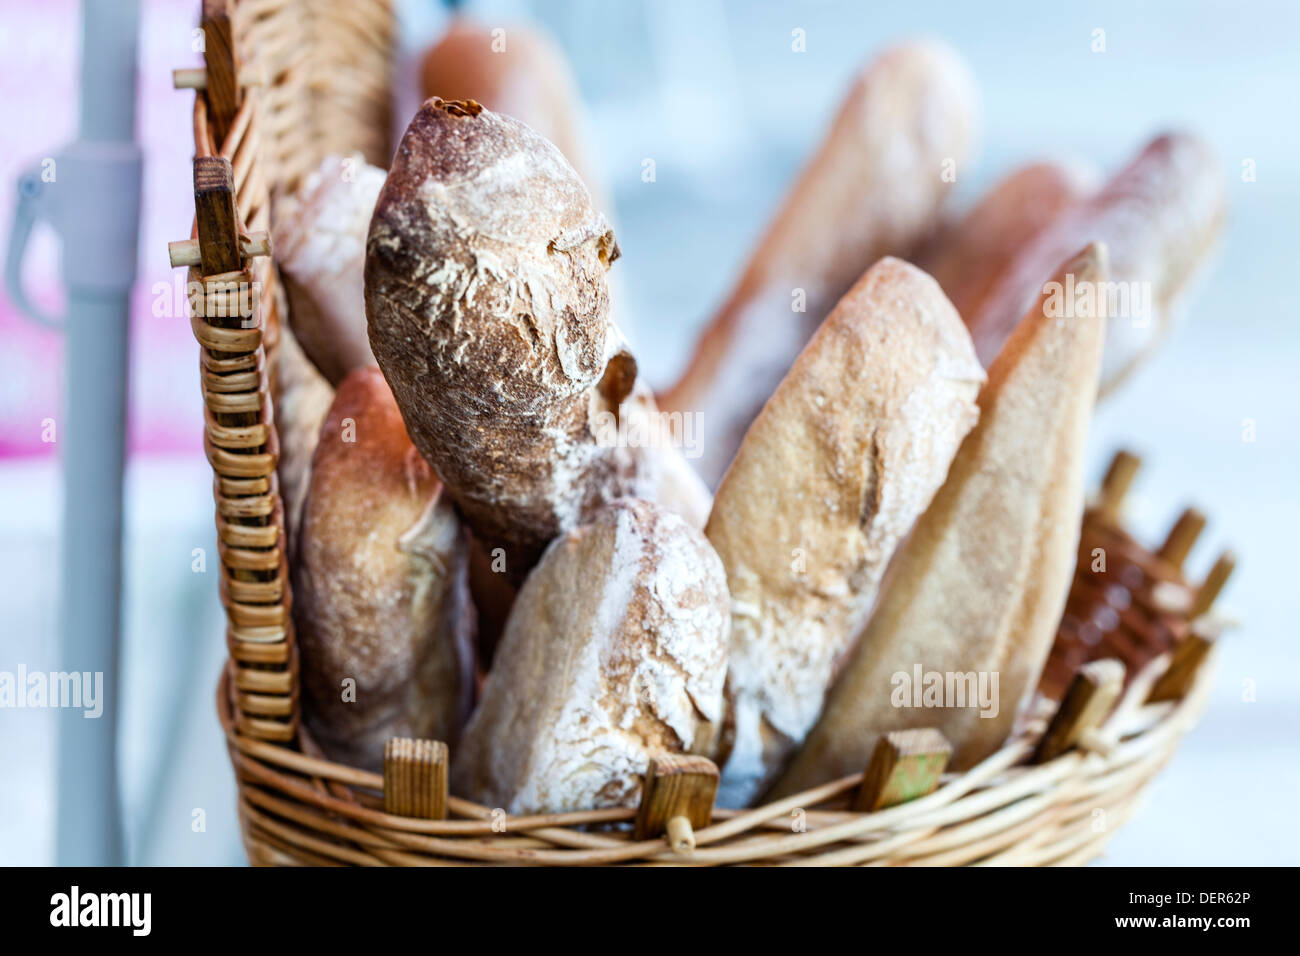 A wicker basket full of crusty fresh French bread sticks or baguettes, for sale outside a shop Stock Photo